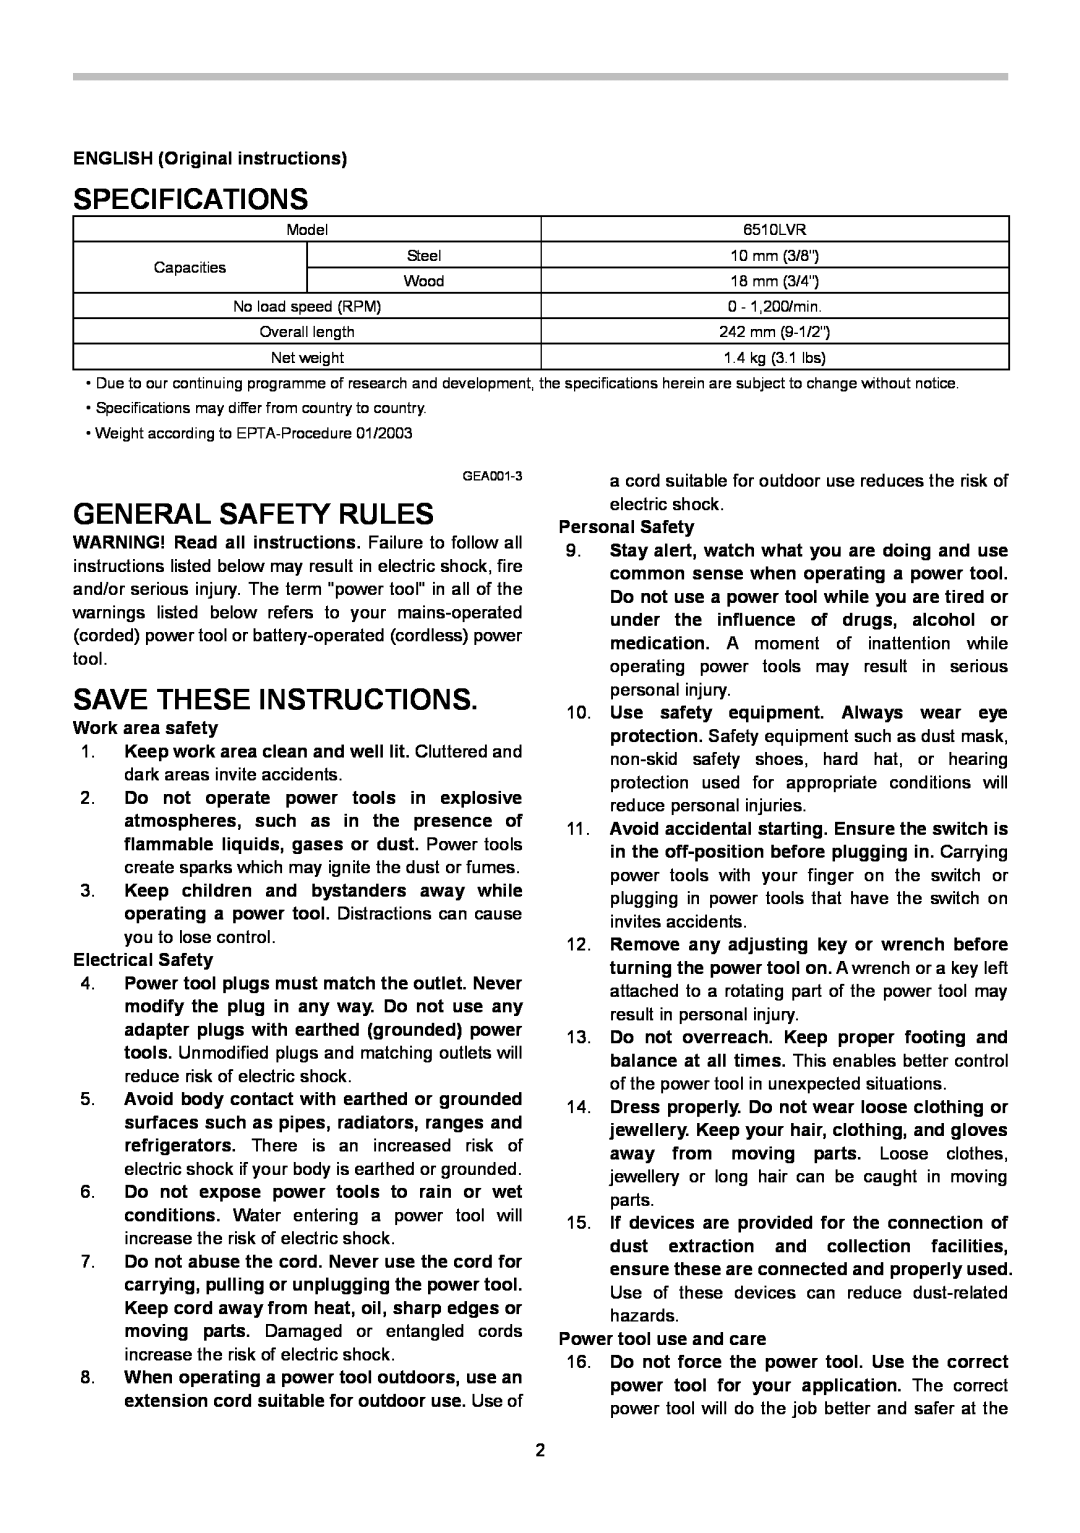 Makita 6510LVR instruction manual Specifications, General Safety Rules, Save These Instructions 